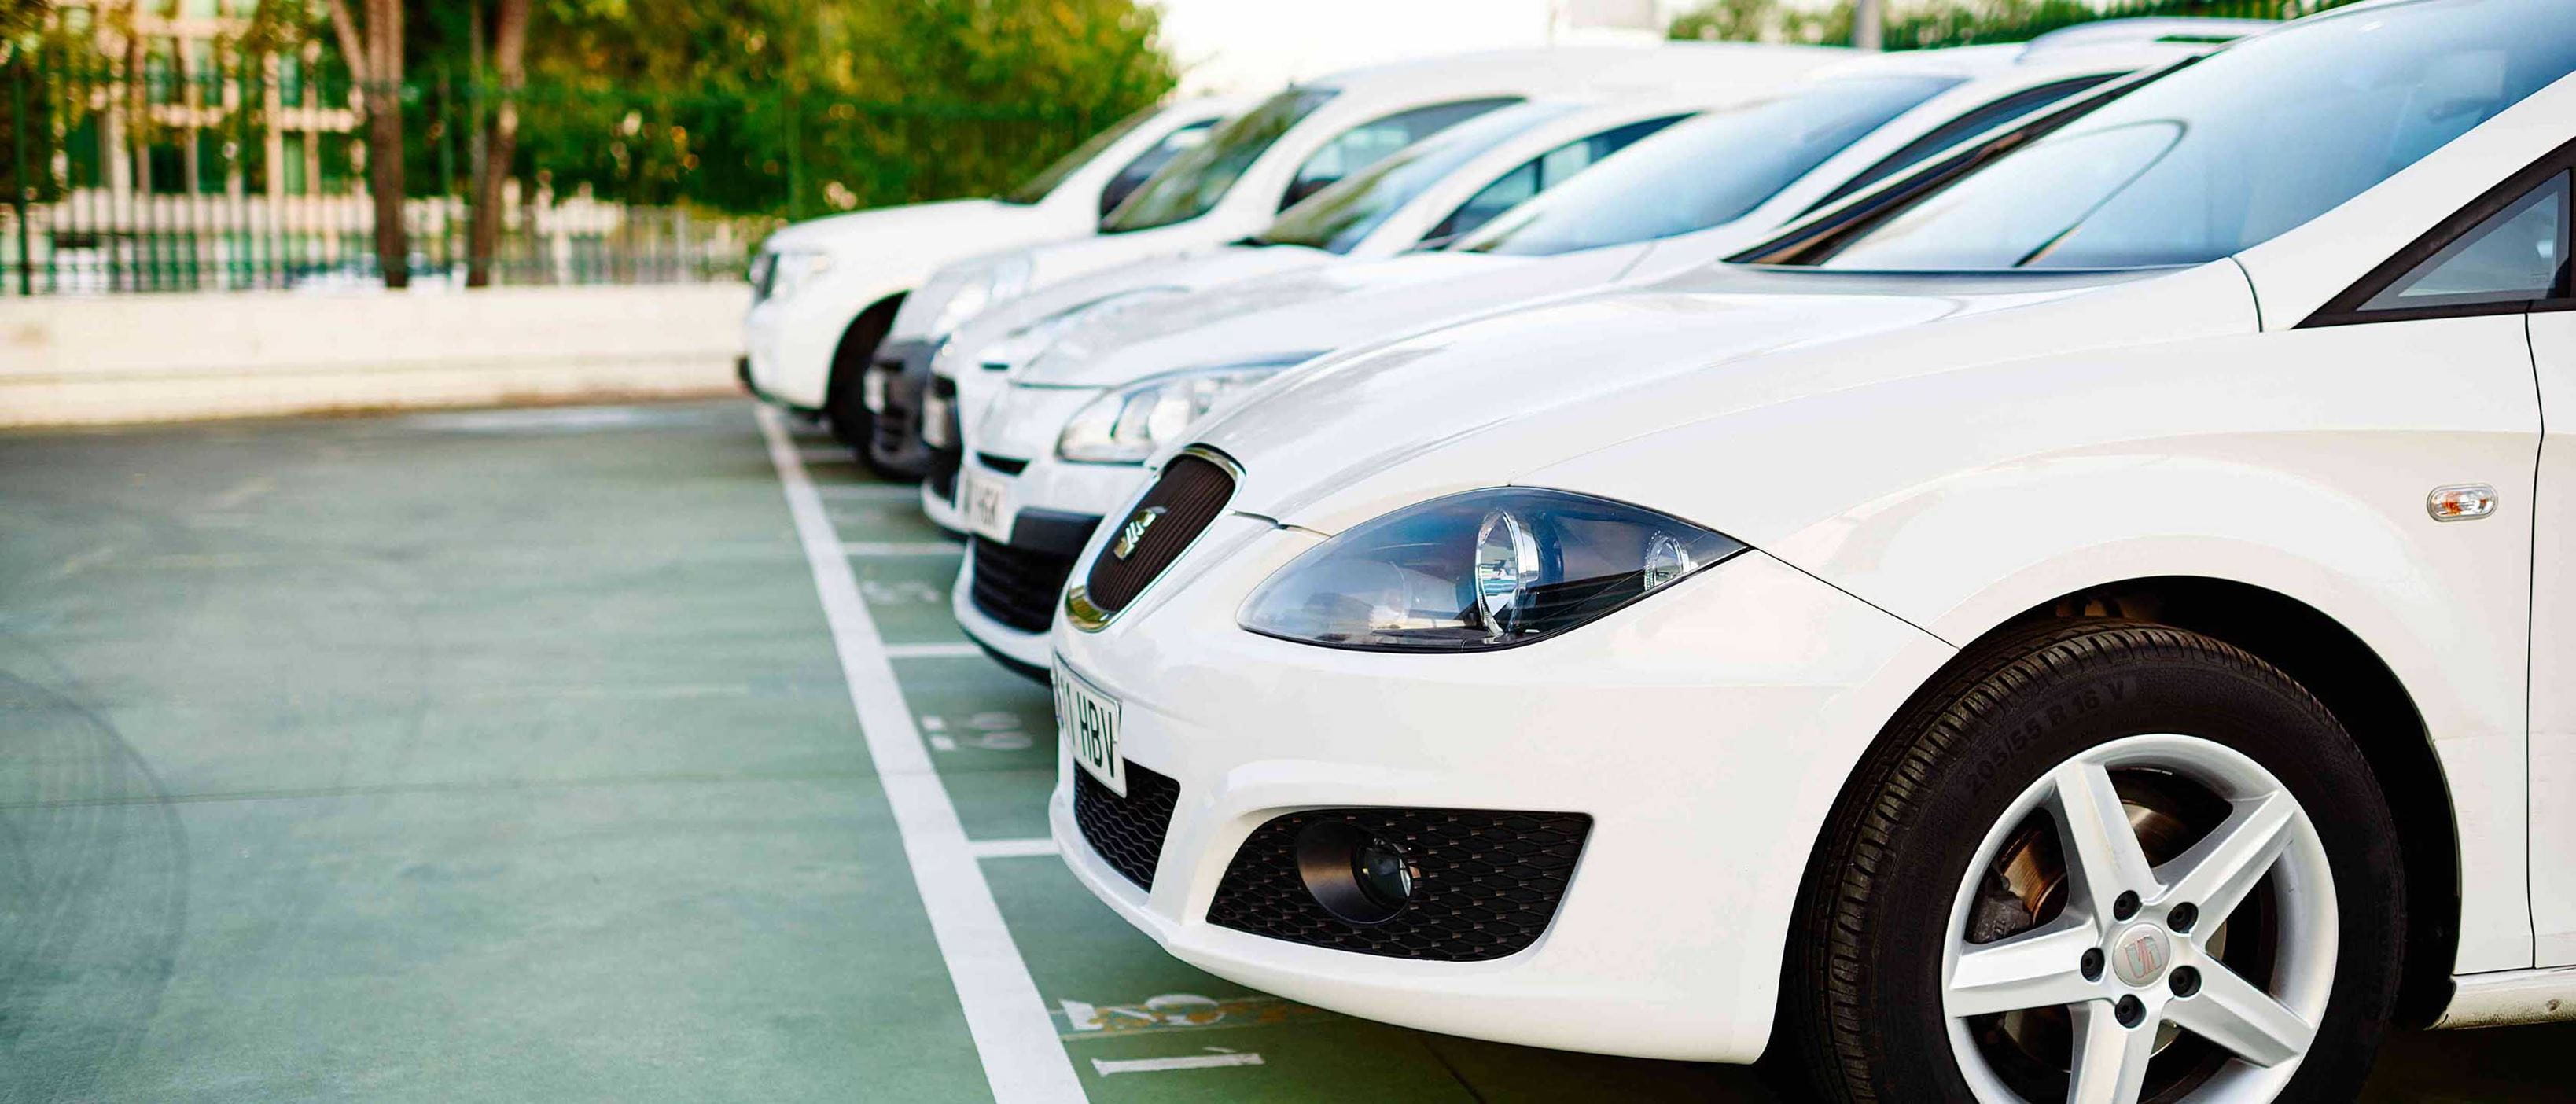 Fleet of Renault white cars parked